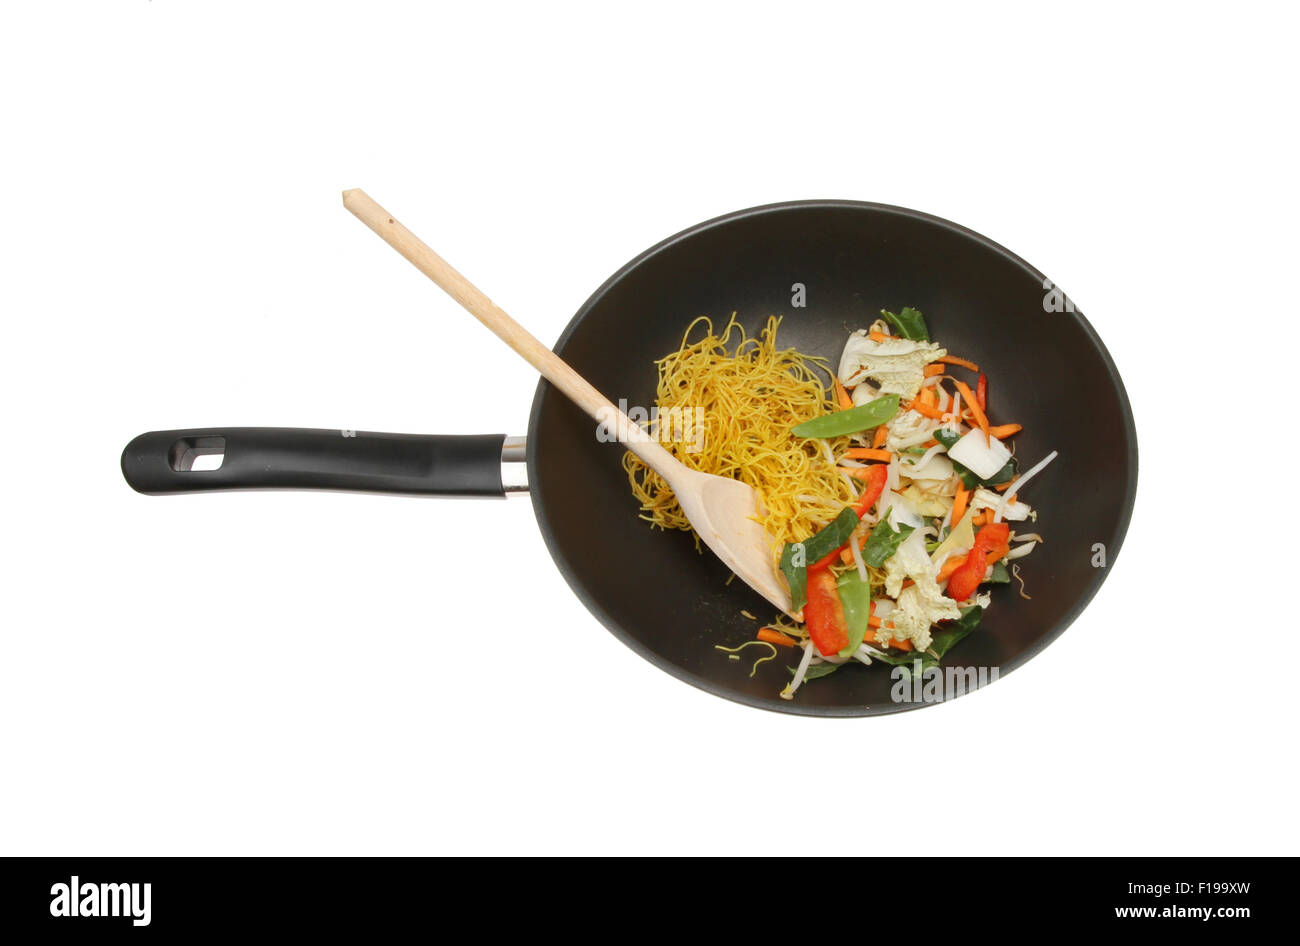 Stir fry ingredients, vegetables and noodles in a wok isolated against white Stock Photo